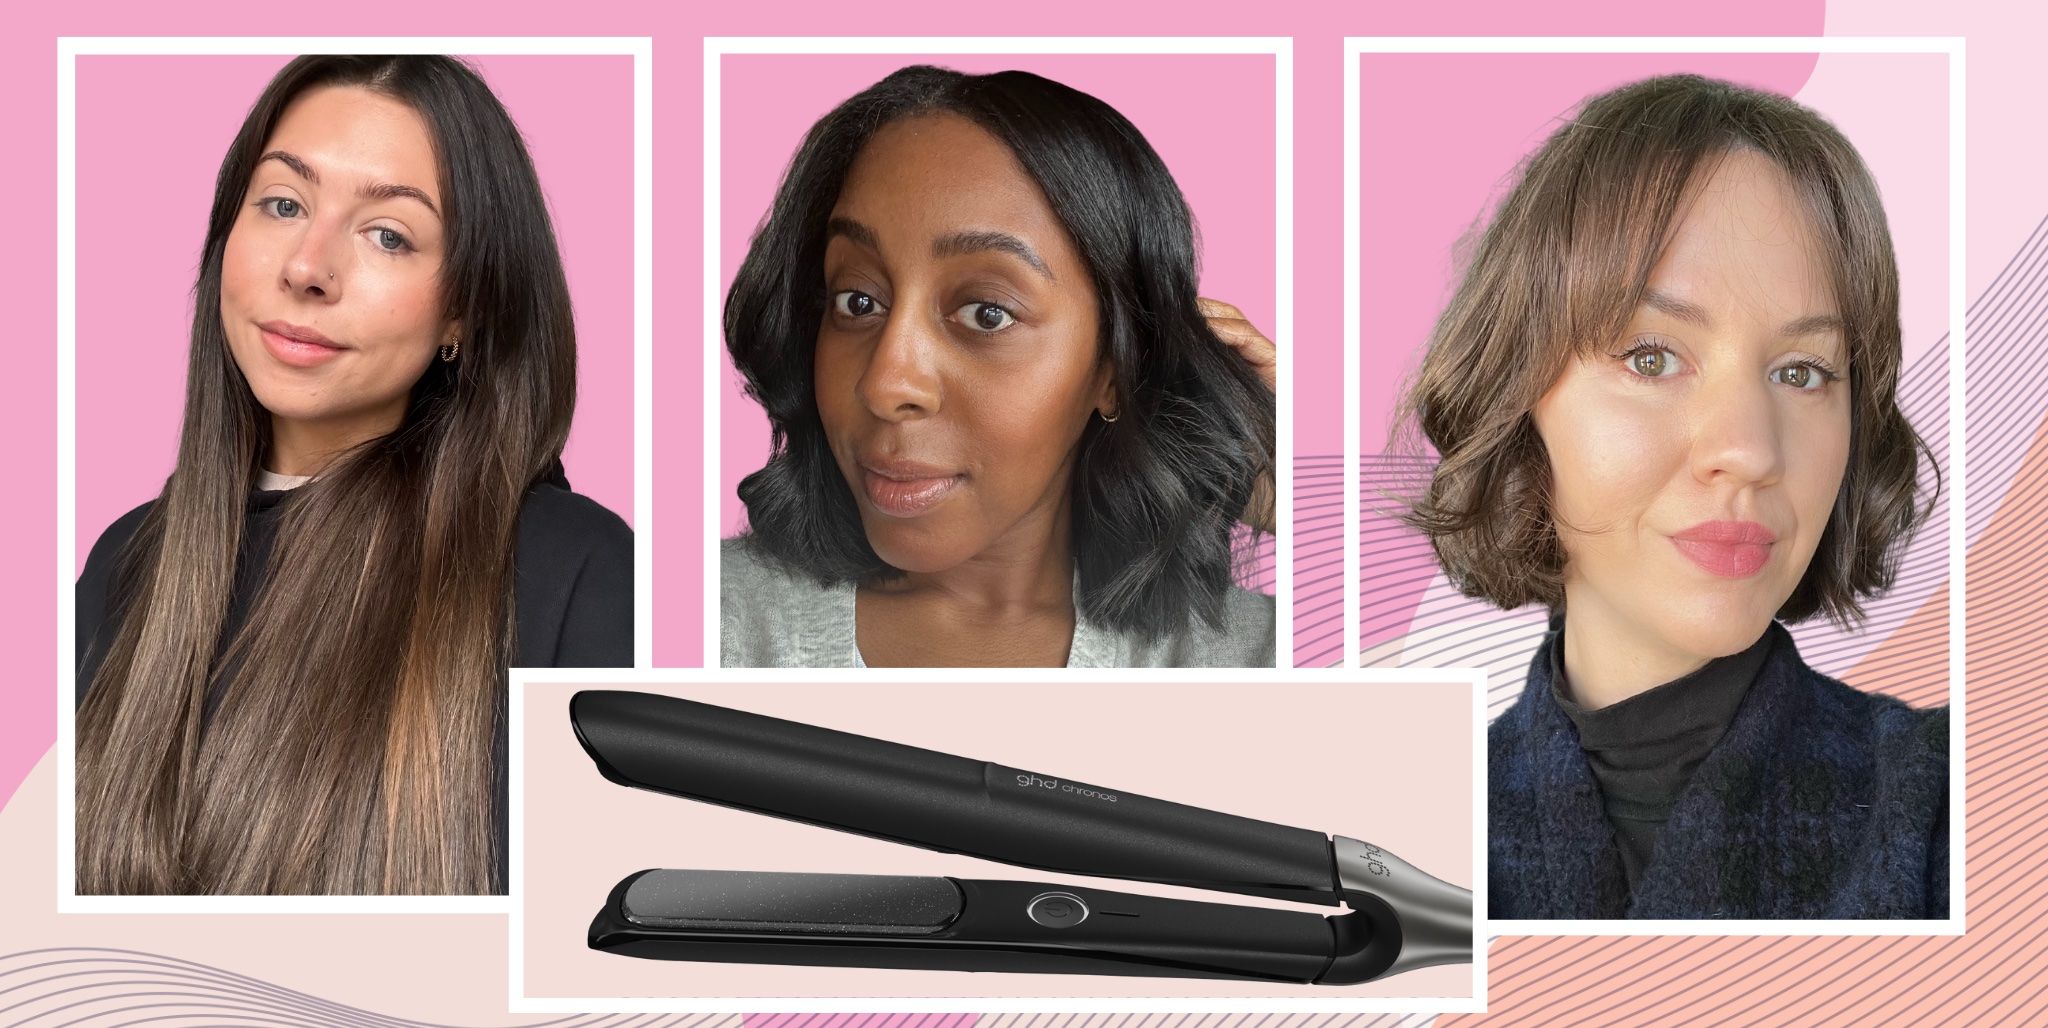 ghd have launched a brand new straightener: 3 beauty editors put